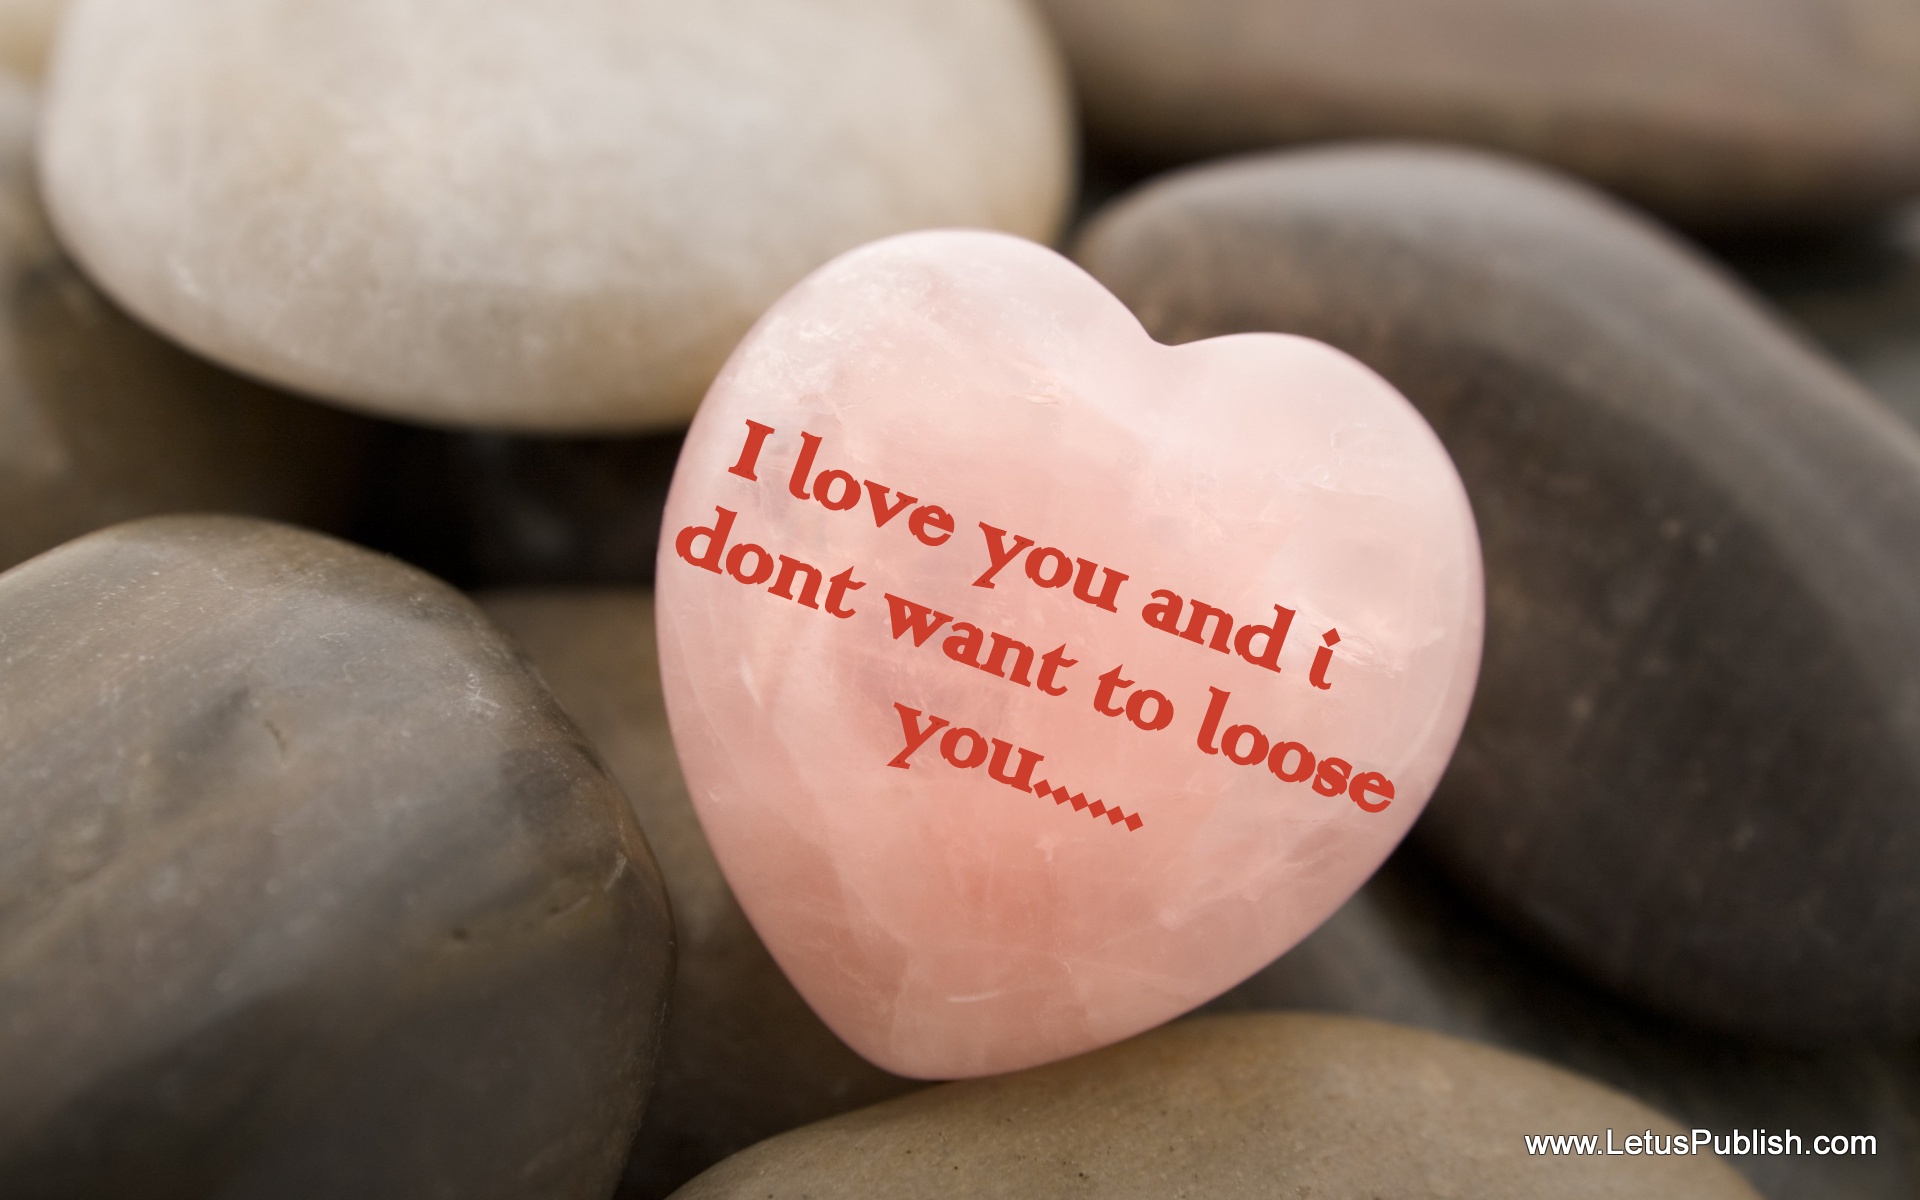 I Love You Hd Wallpaper With Quotes - Love You Hd Images With Quotes - HD Wallpaper 